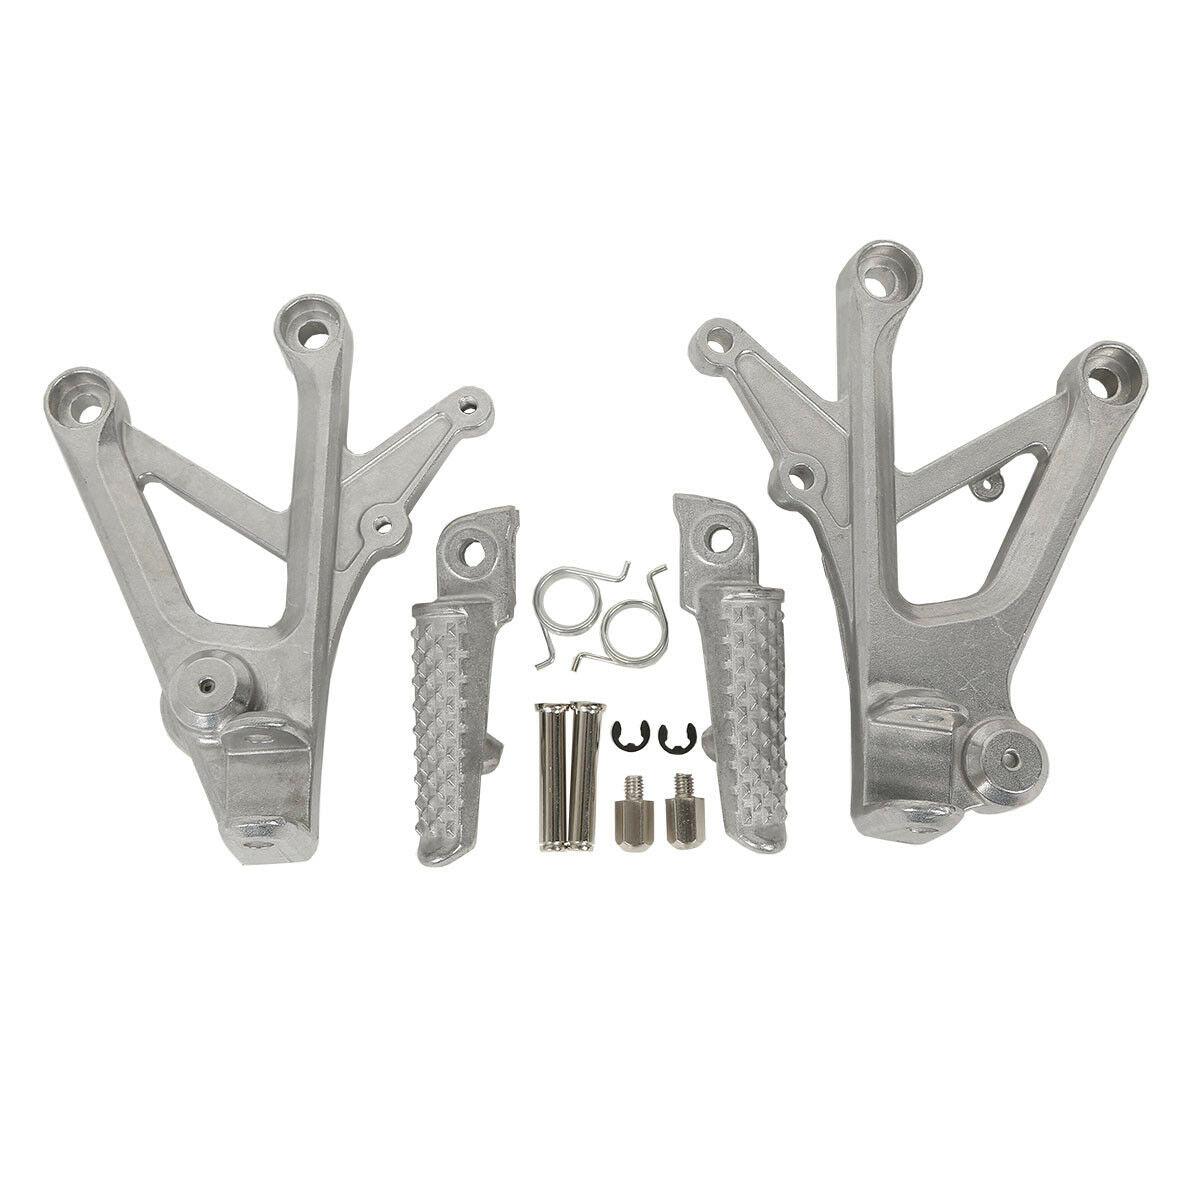 Front Footrest Foot Pegs Fit For Honda CBR 600 F4 I 2001-2006 05 04 03 02 - Moto Life Products